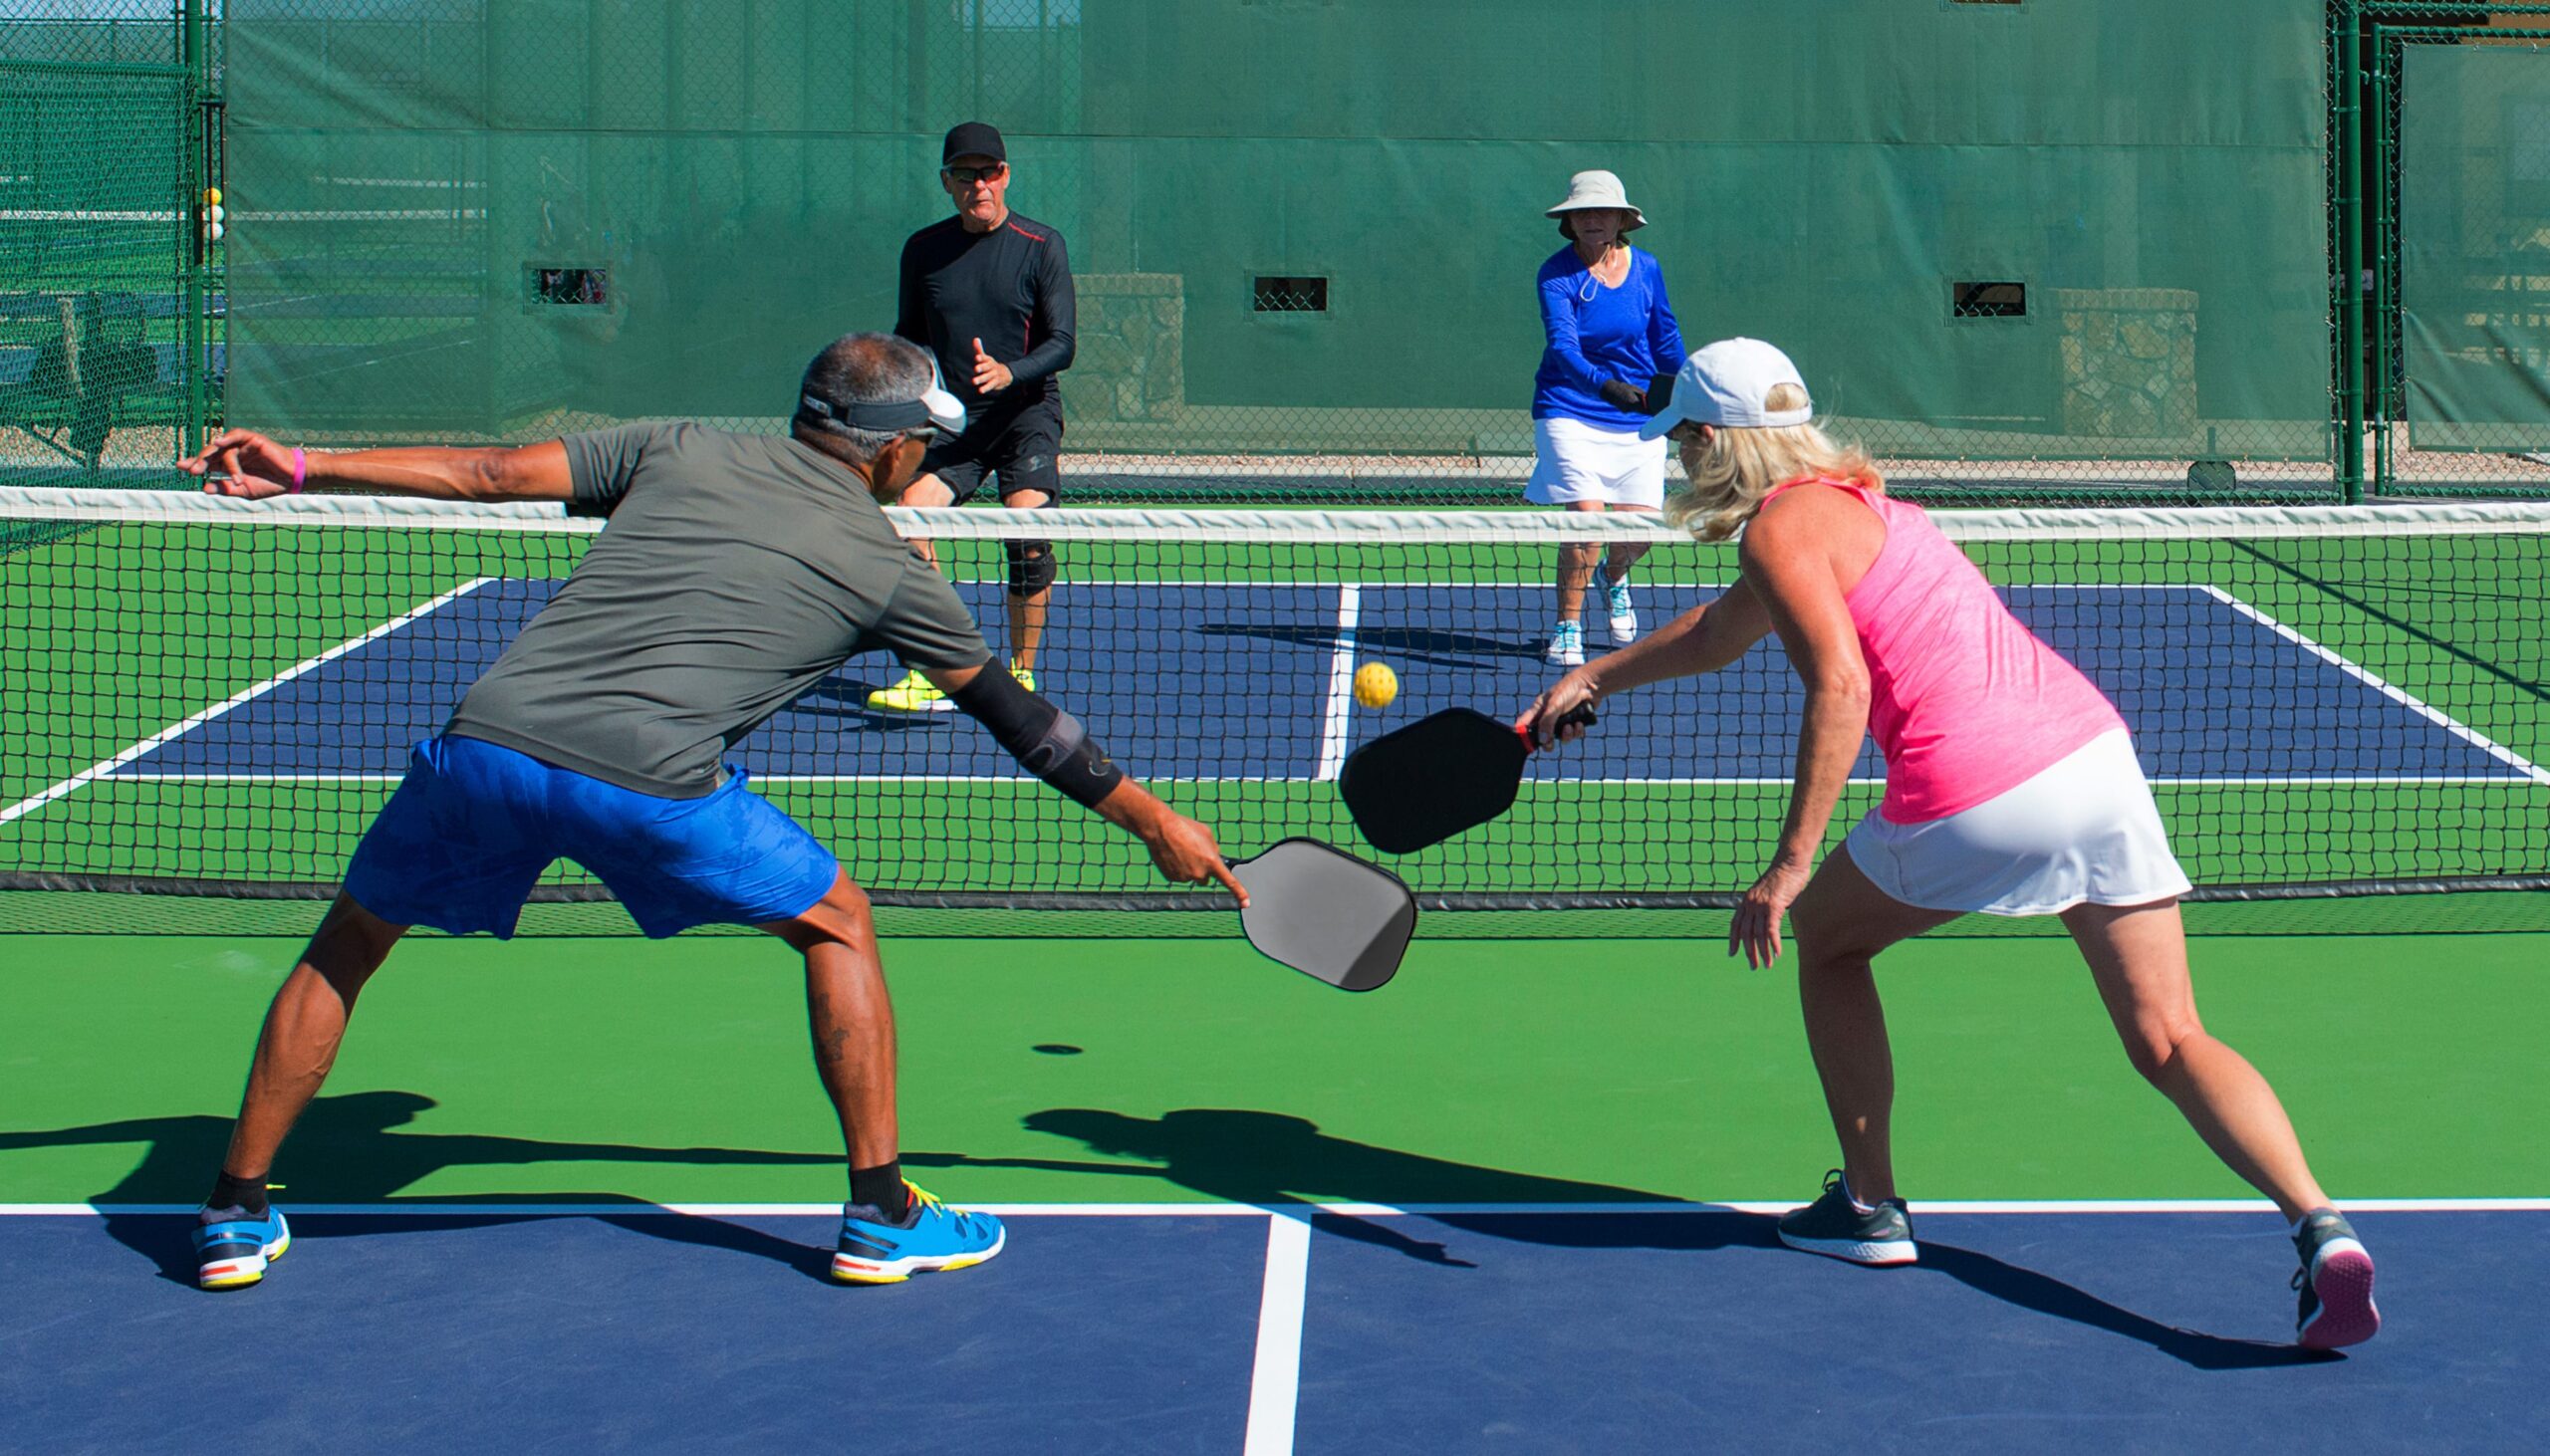 How To Reduce Errors, Improve Your Pickleball Game, & Have More Fun